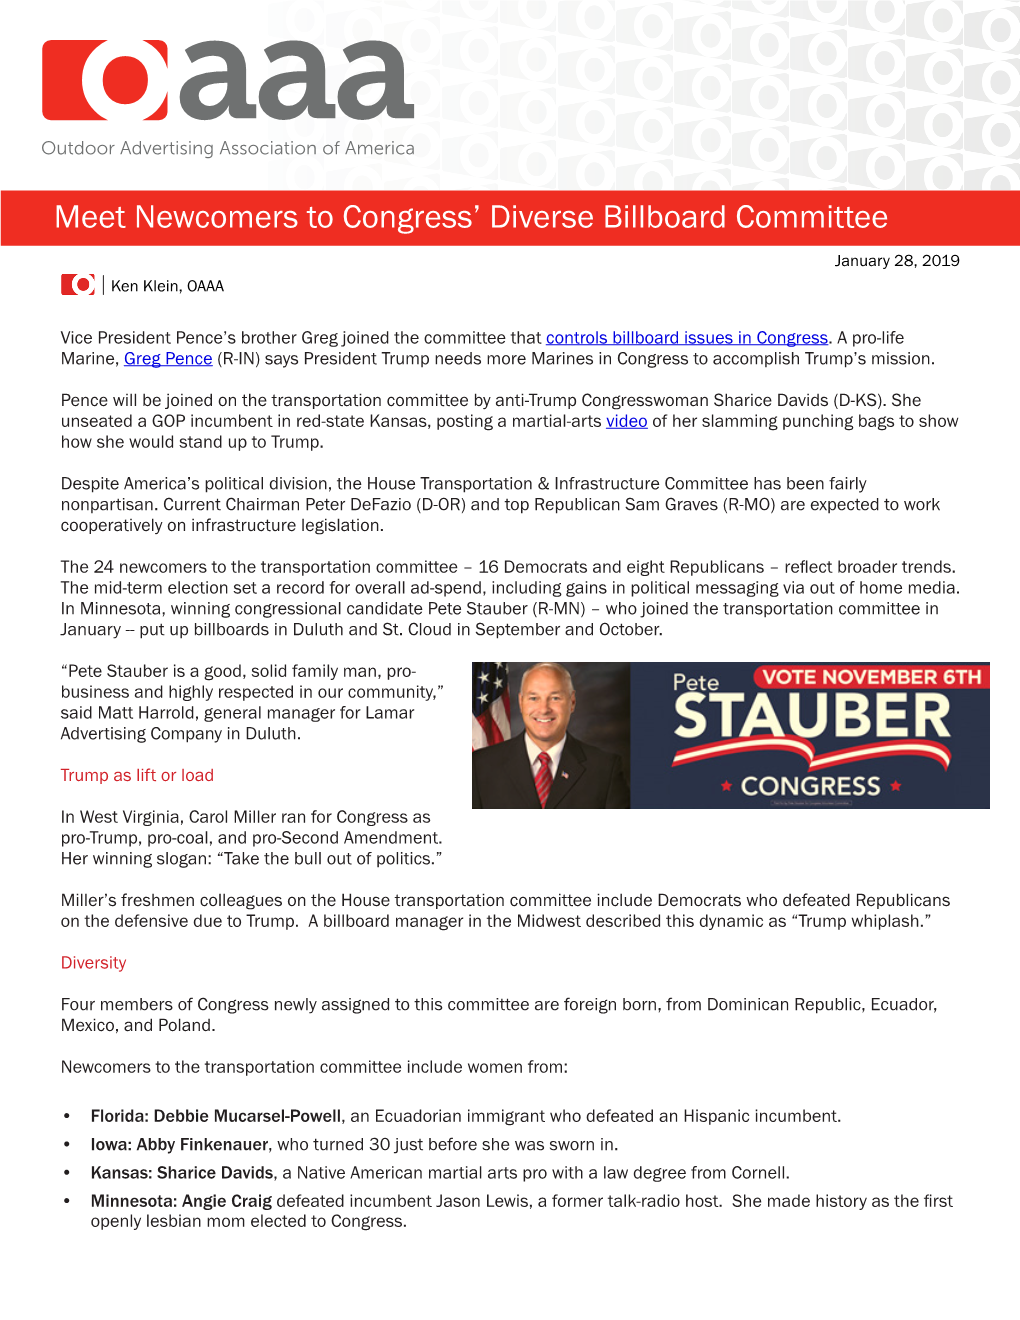 Meet Newcomers to Congress' Diverse Billboard Committee